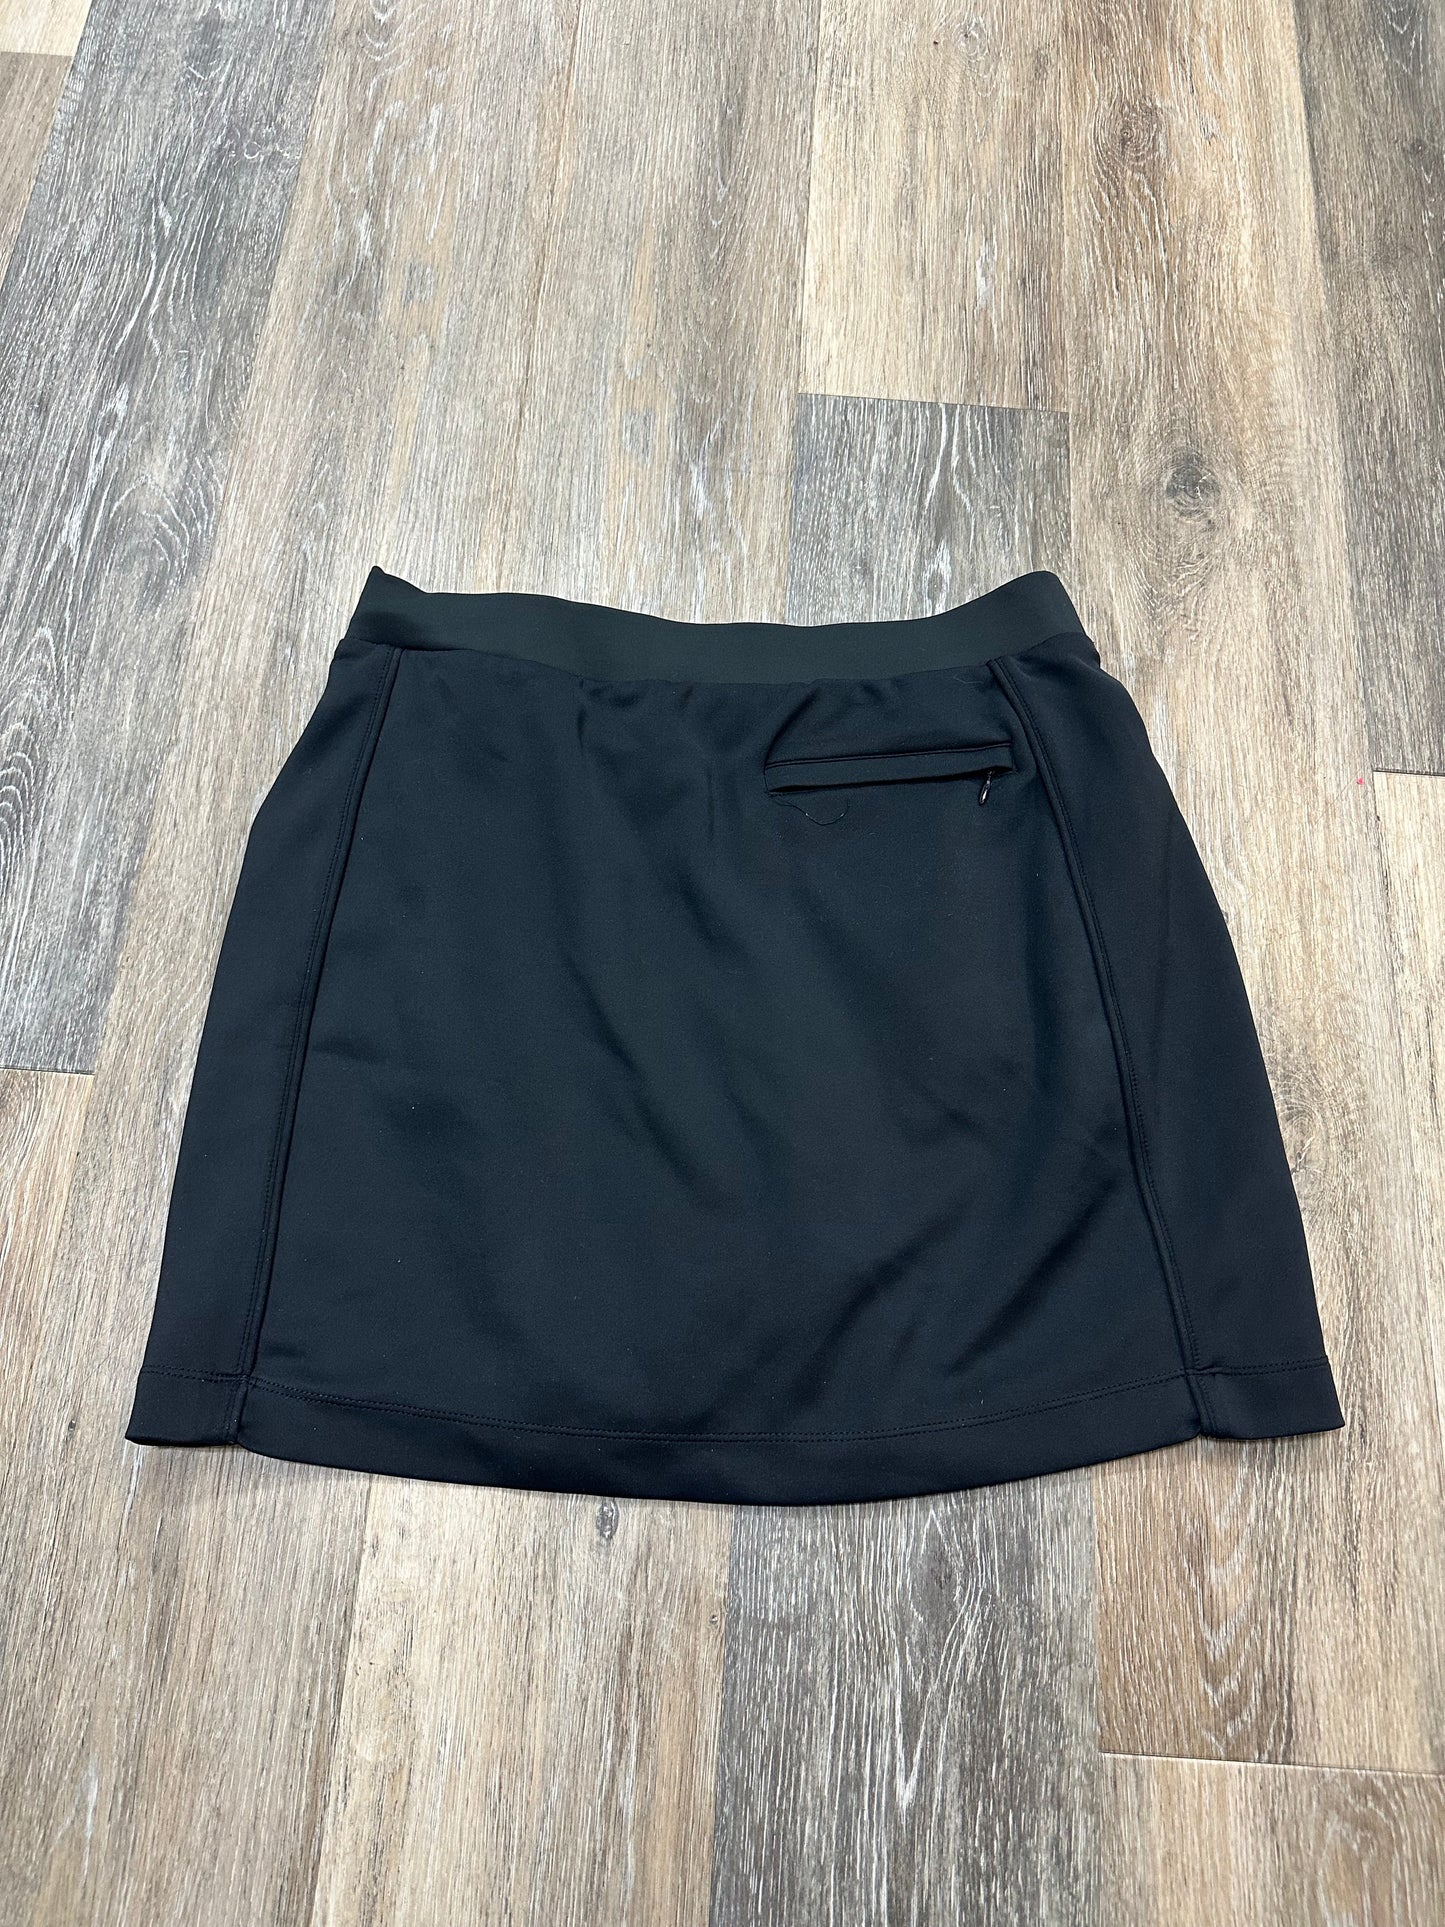 Athletic Skort By Fairway and Greene  Size: S